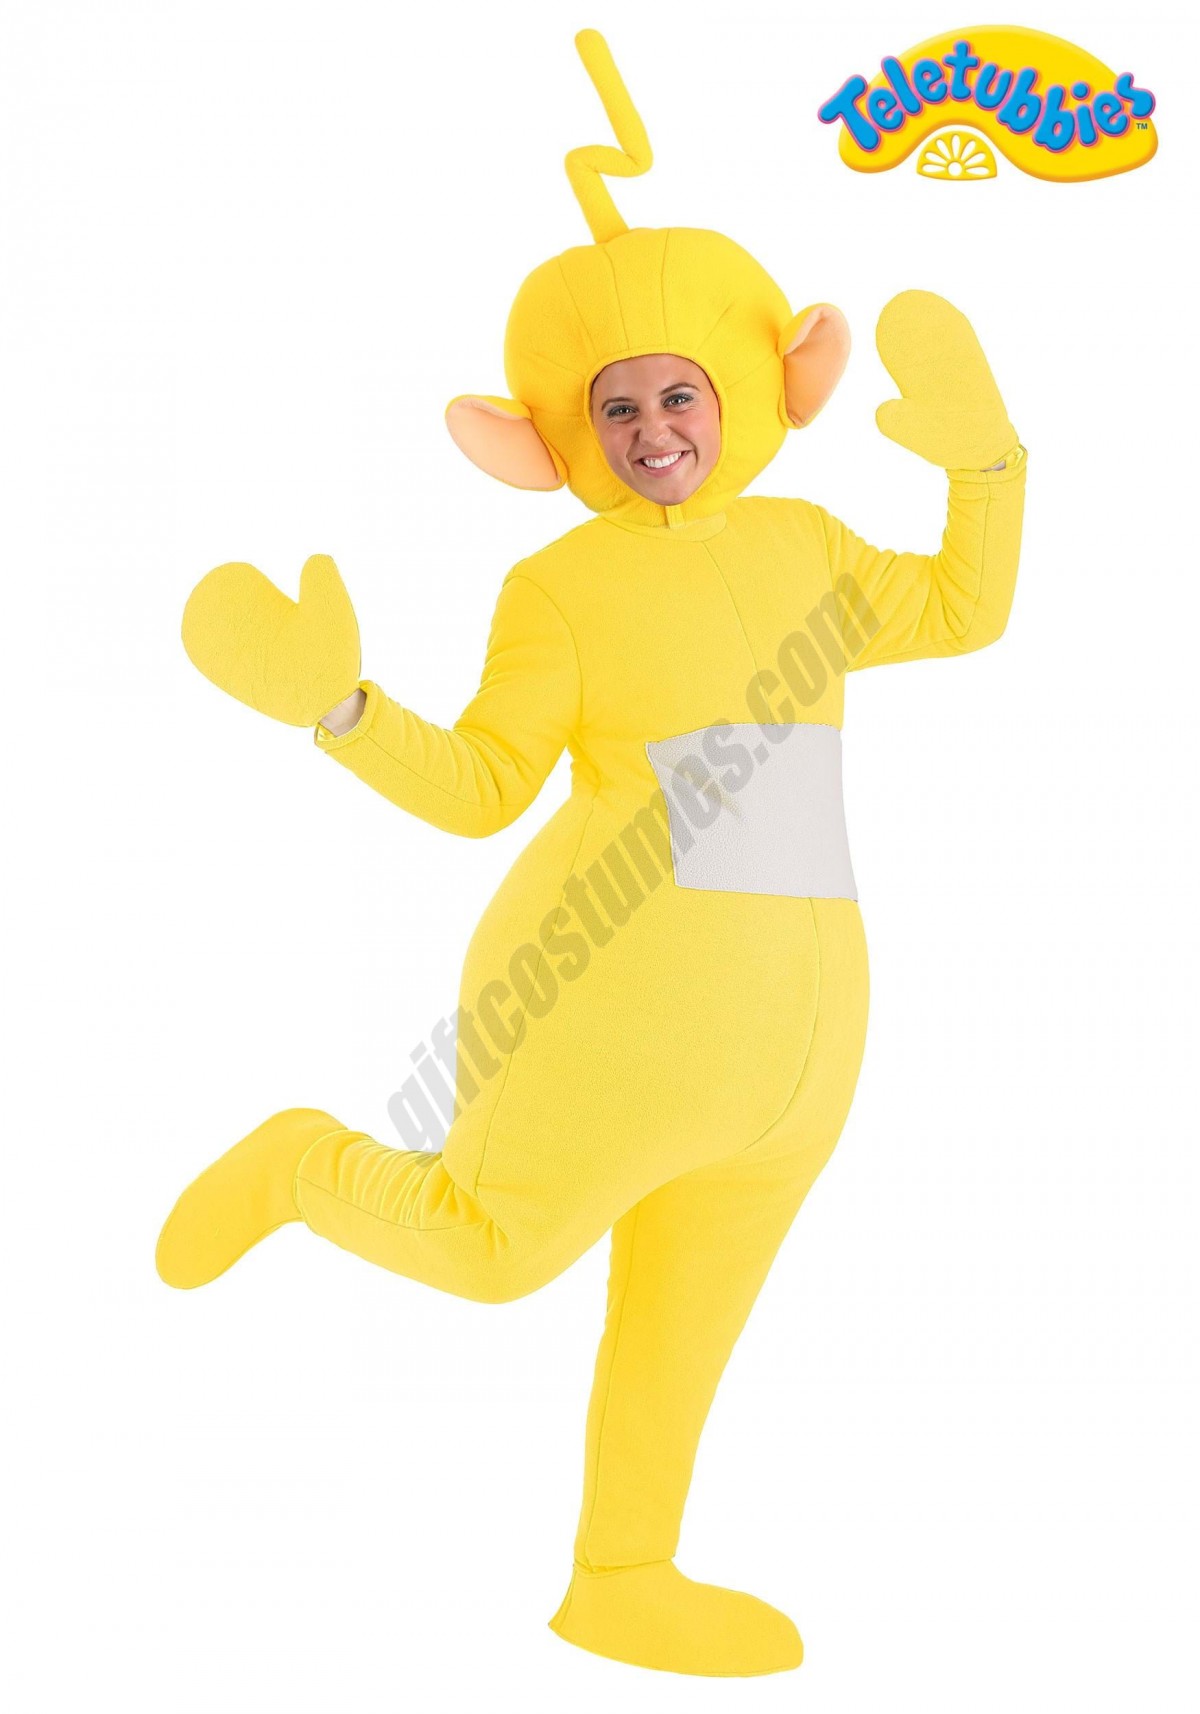 Plus Size Laa-Laa Teletubbies Costume for Adults Promotions - -0